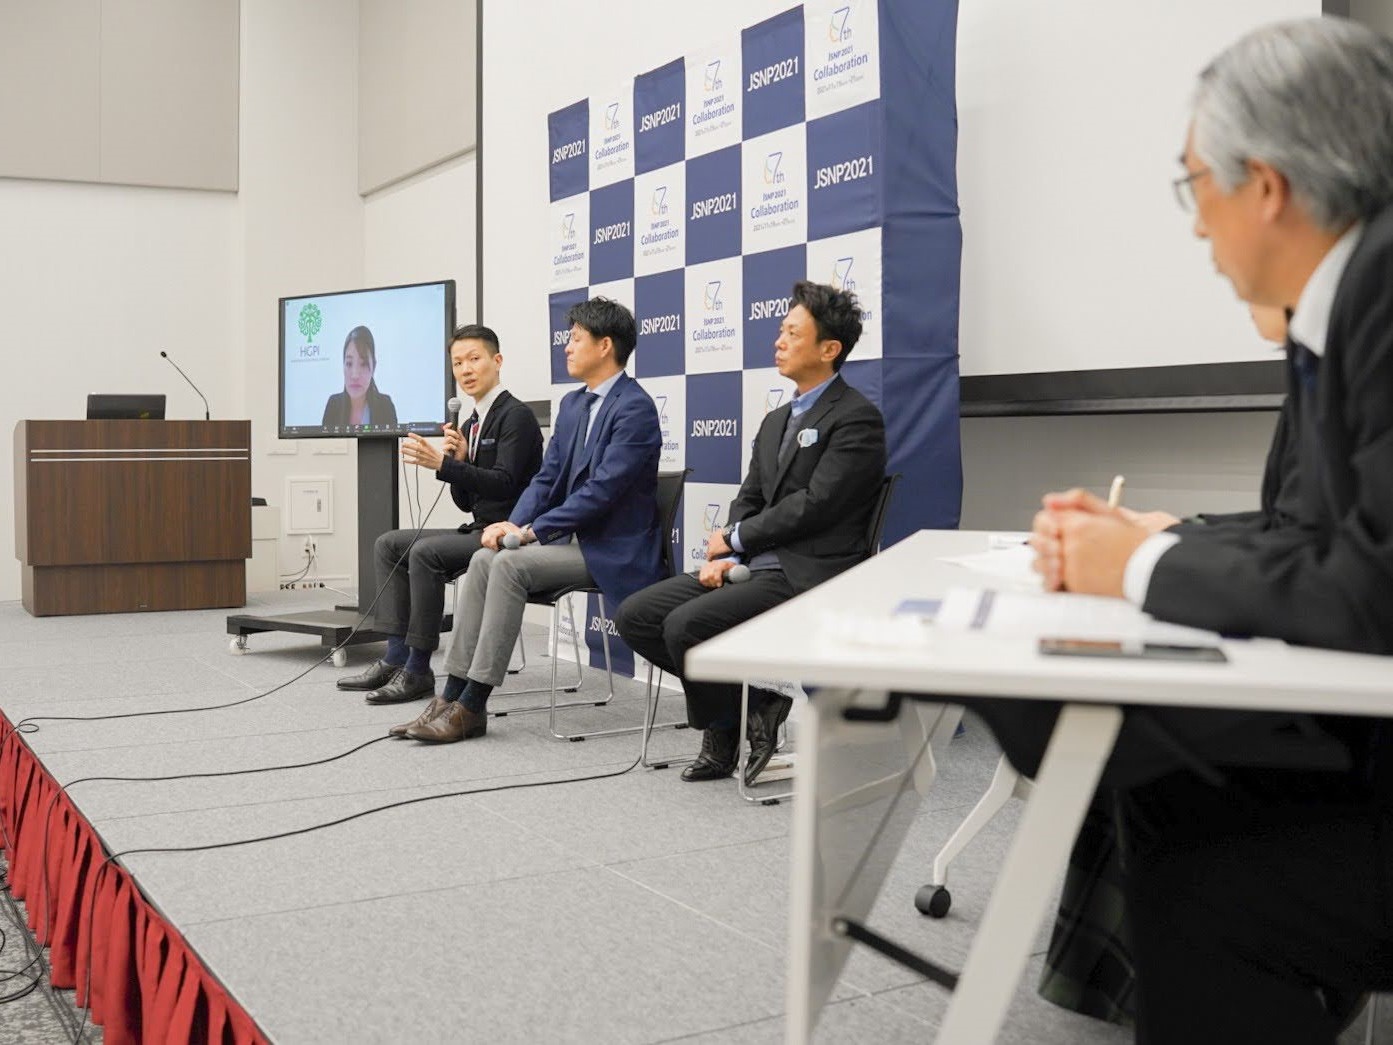 [Event Report] The 7th Annual Meeting of the Japan Society of Nurse Practitioners: Examining the True Value of Nurse Practitioners and Creating New Value (November 20, 2021)